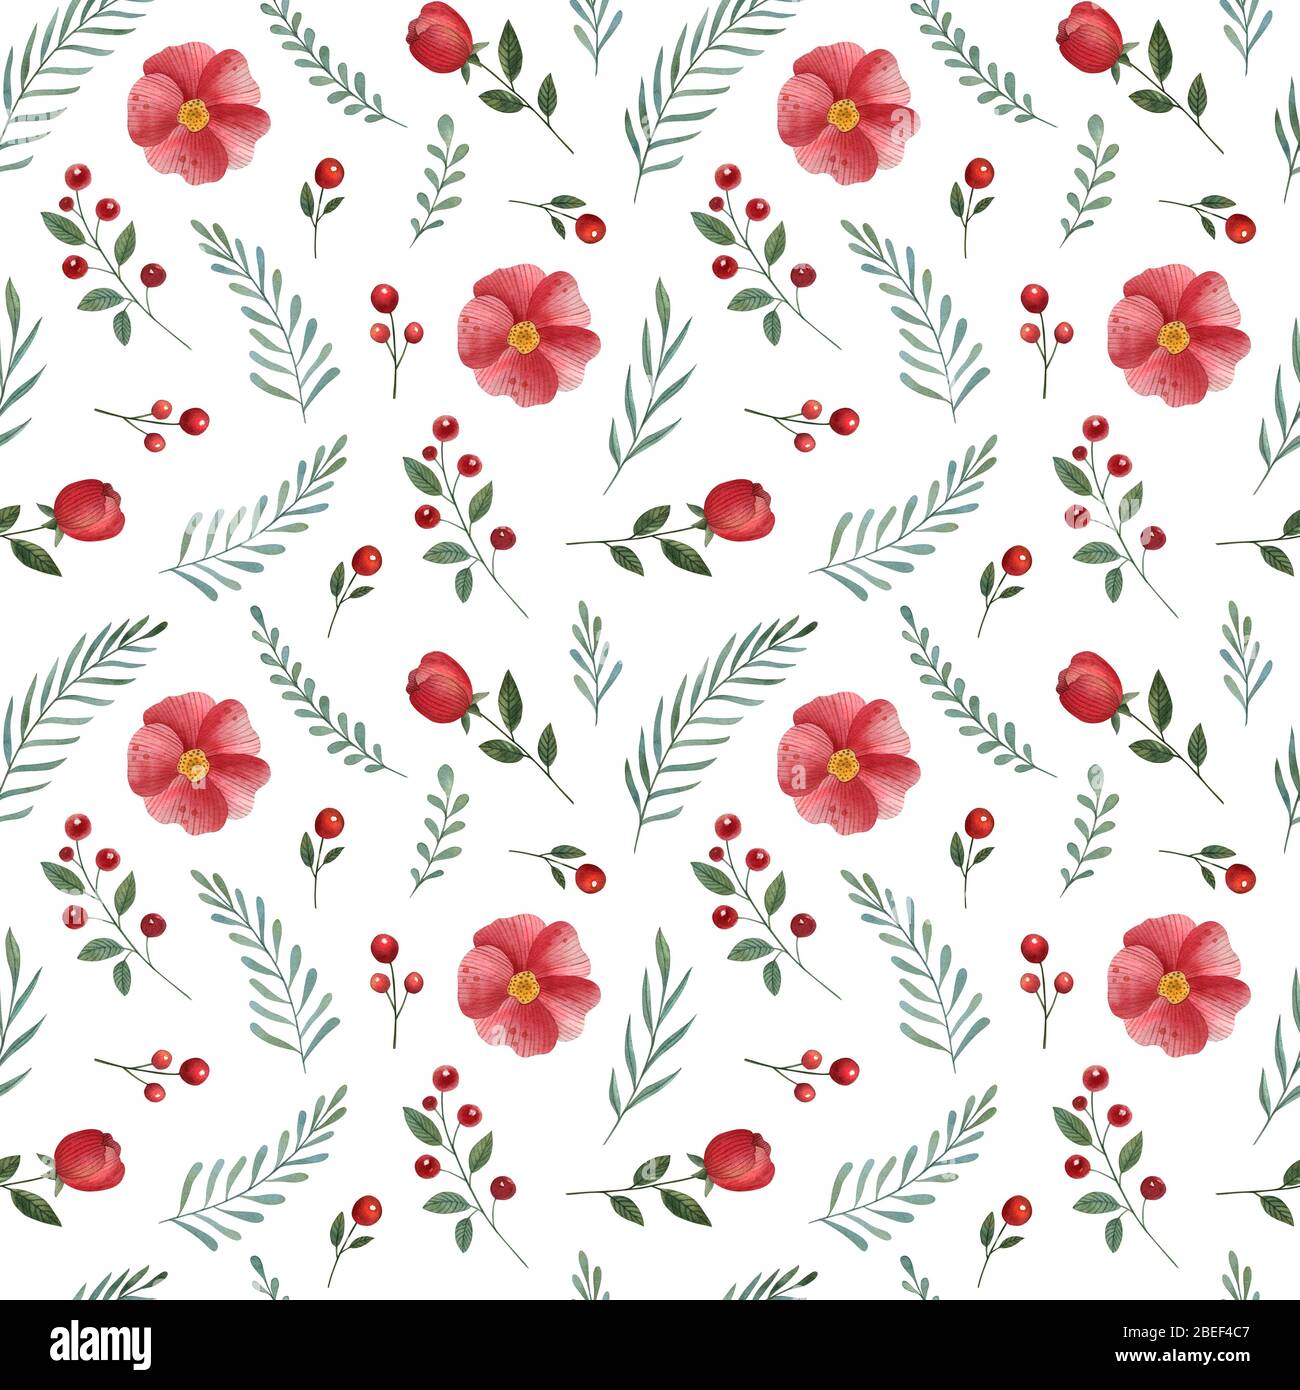 Watercolor Floral Seamless Pattern On The Light Background Hand Drawn